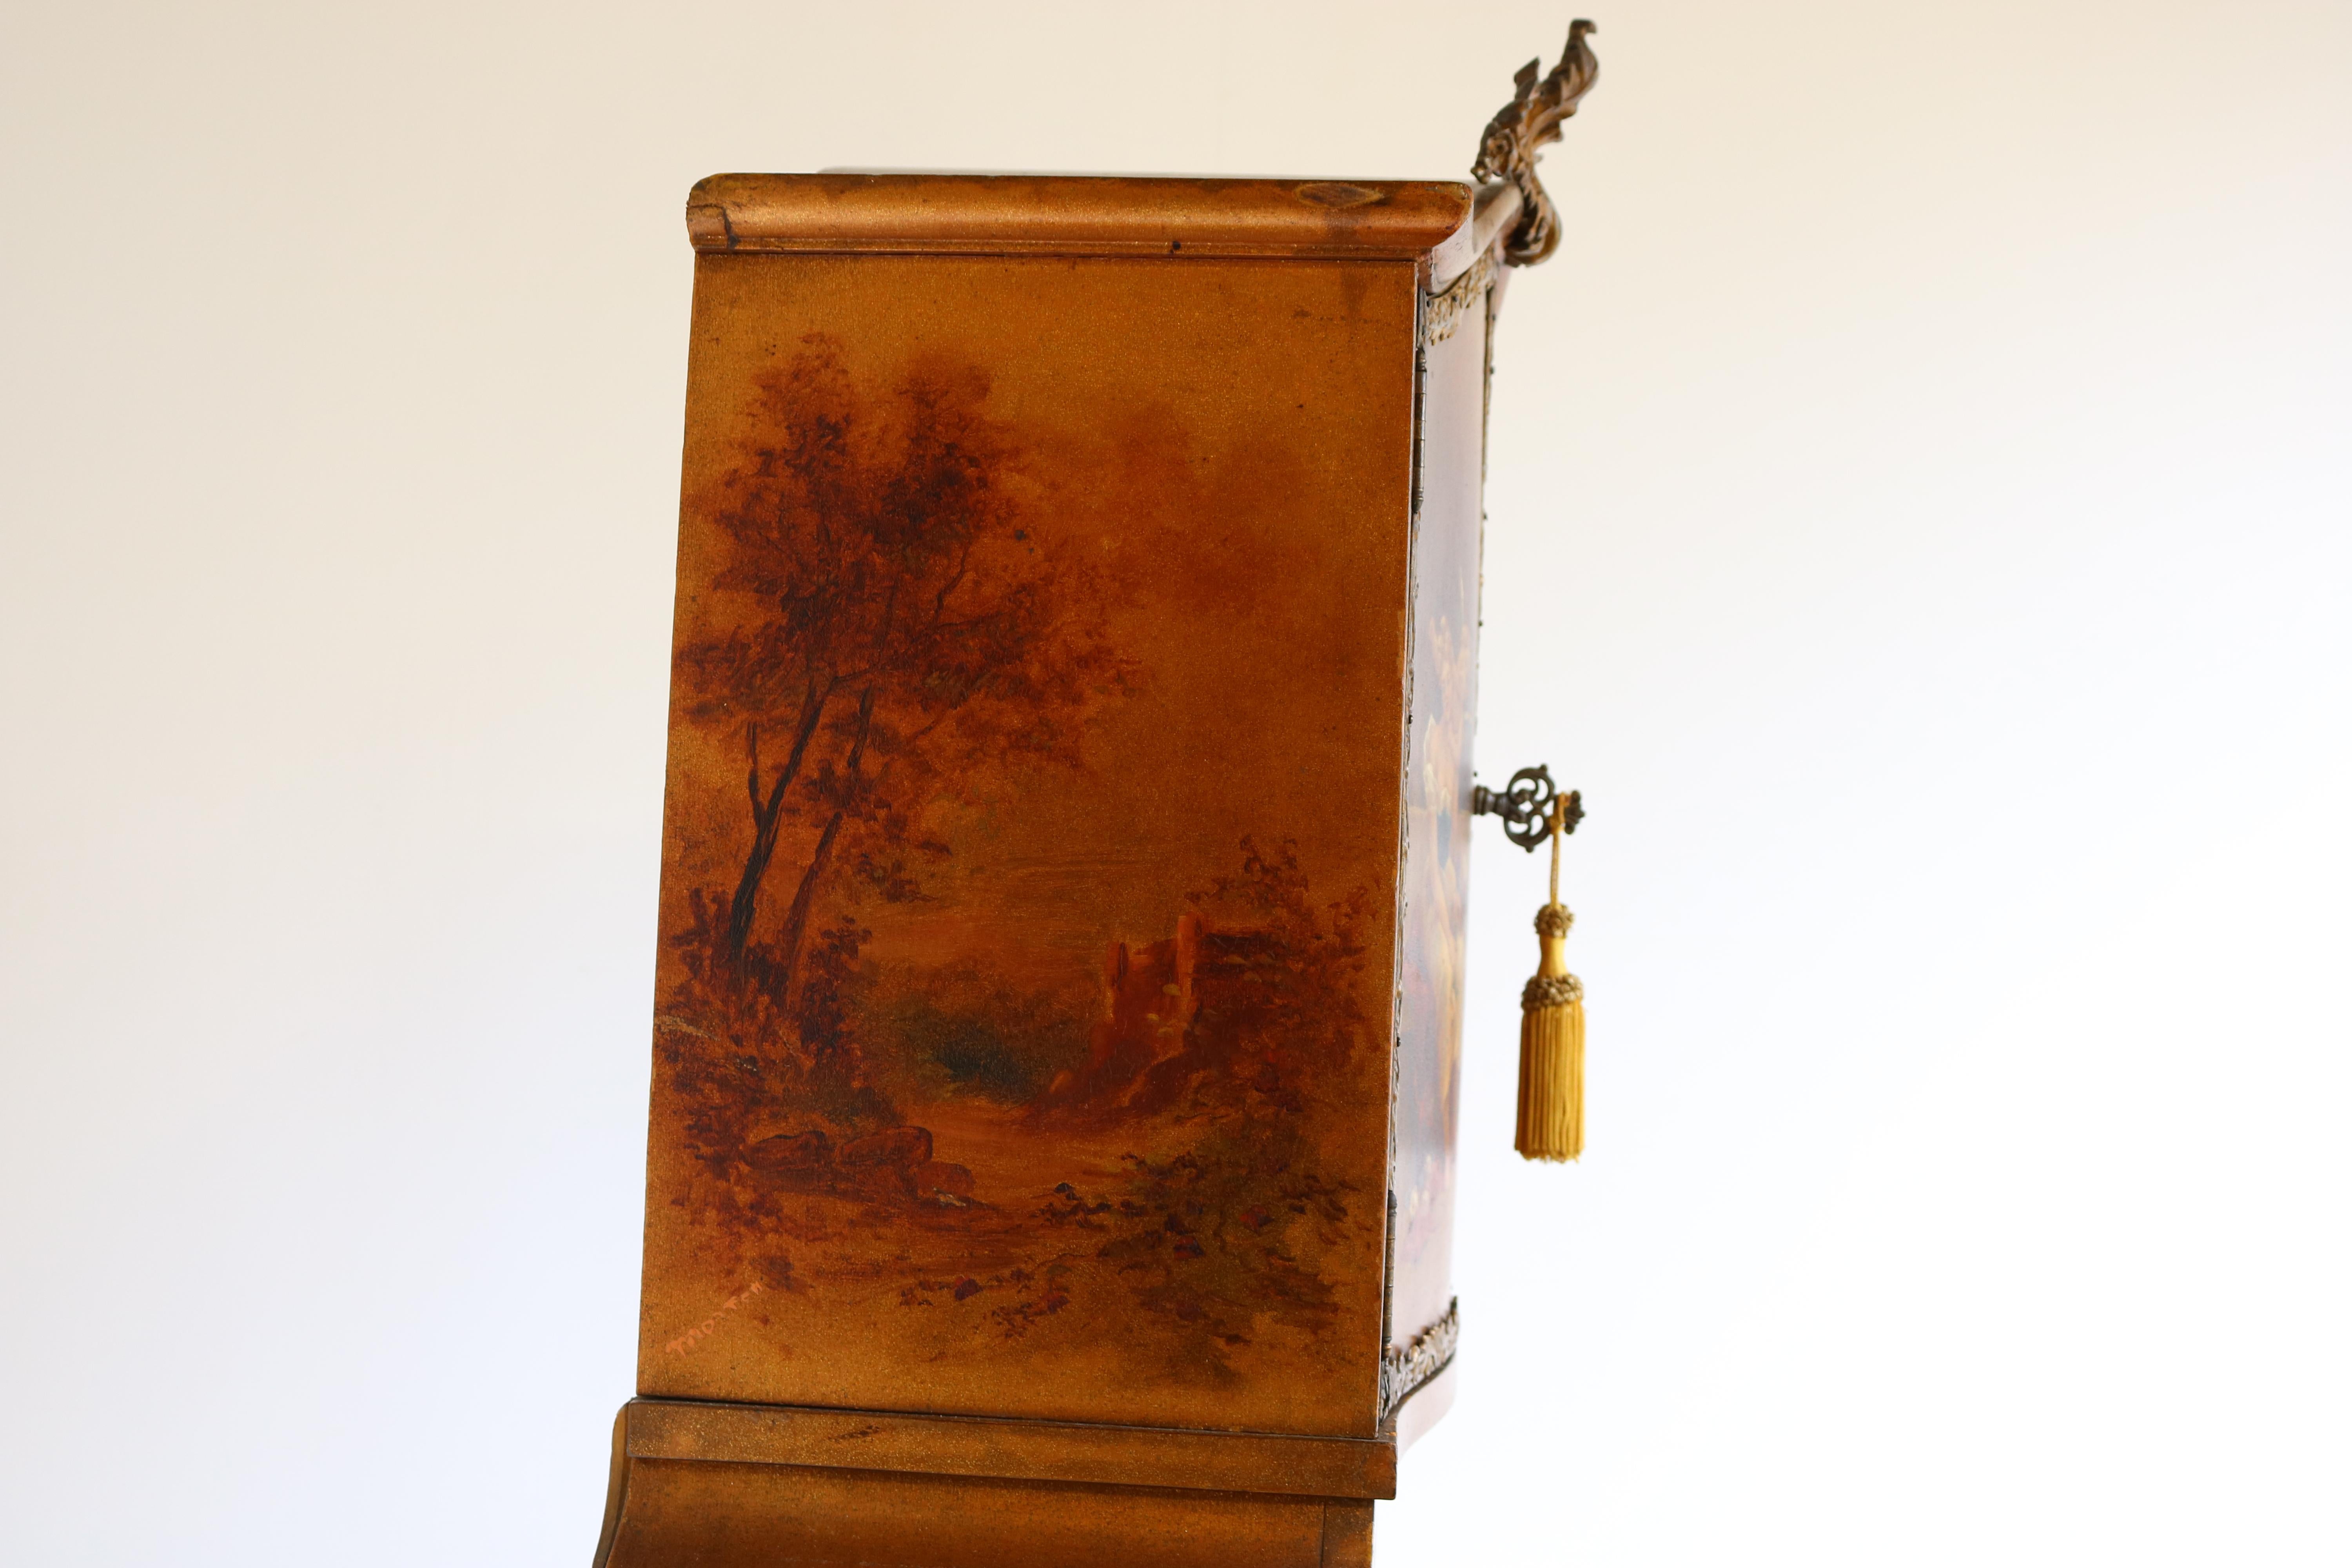 Italian Renaissance Dressing Table 19th Century Hand Painted by Müller Morten For Sale 1